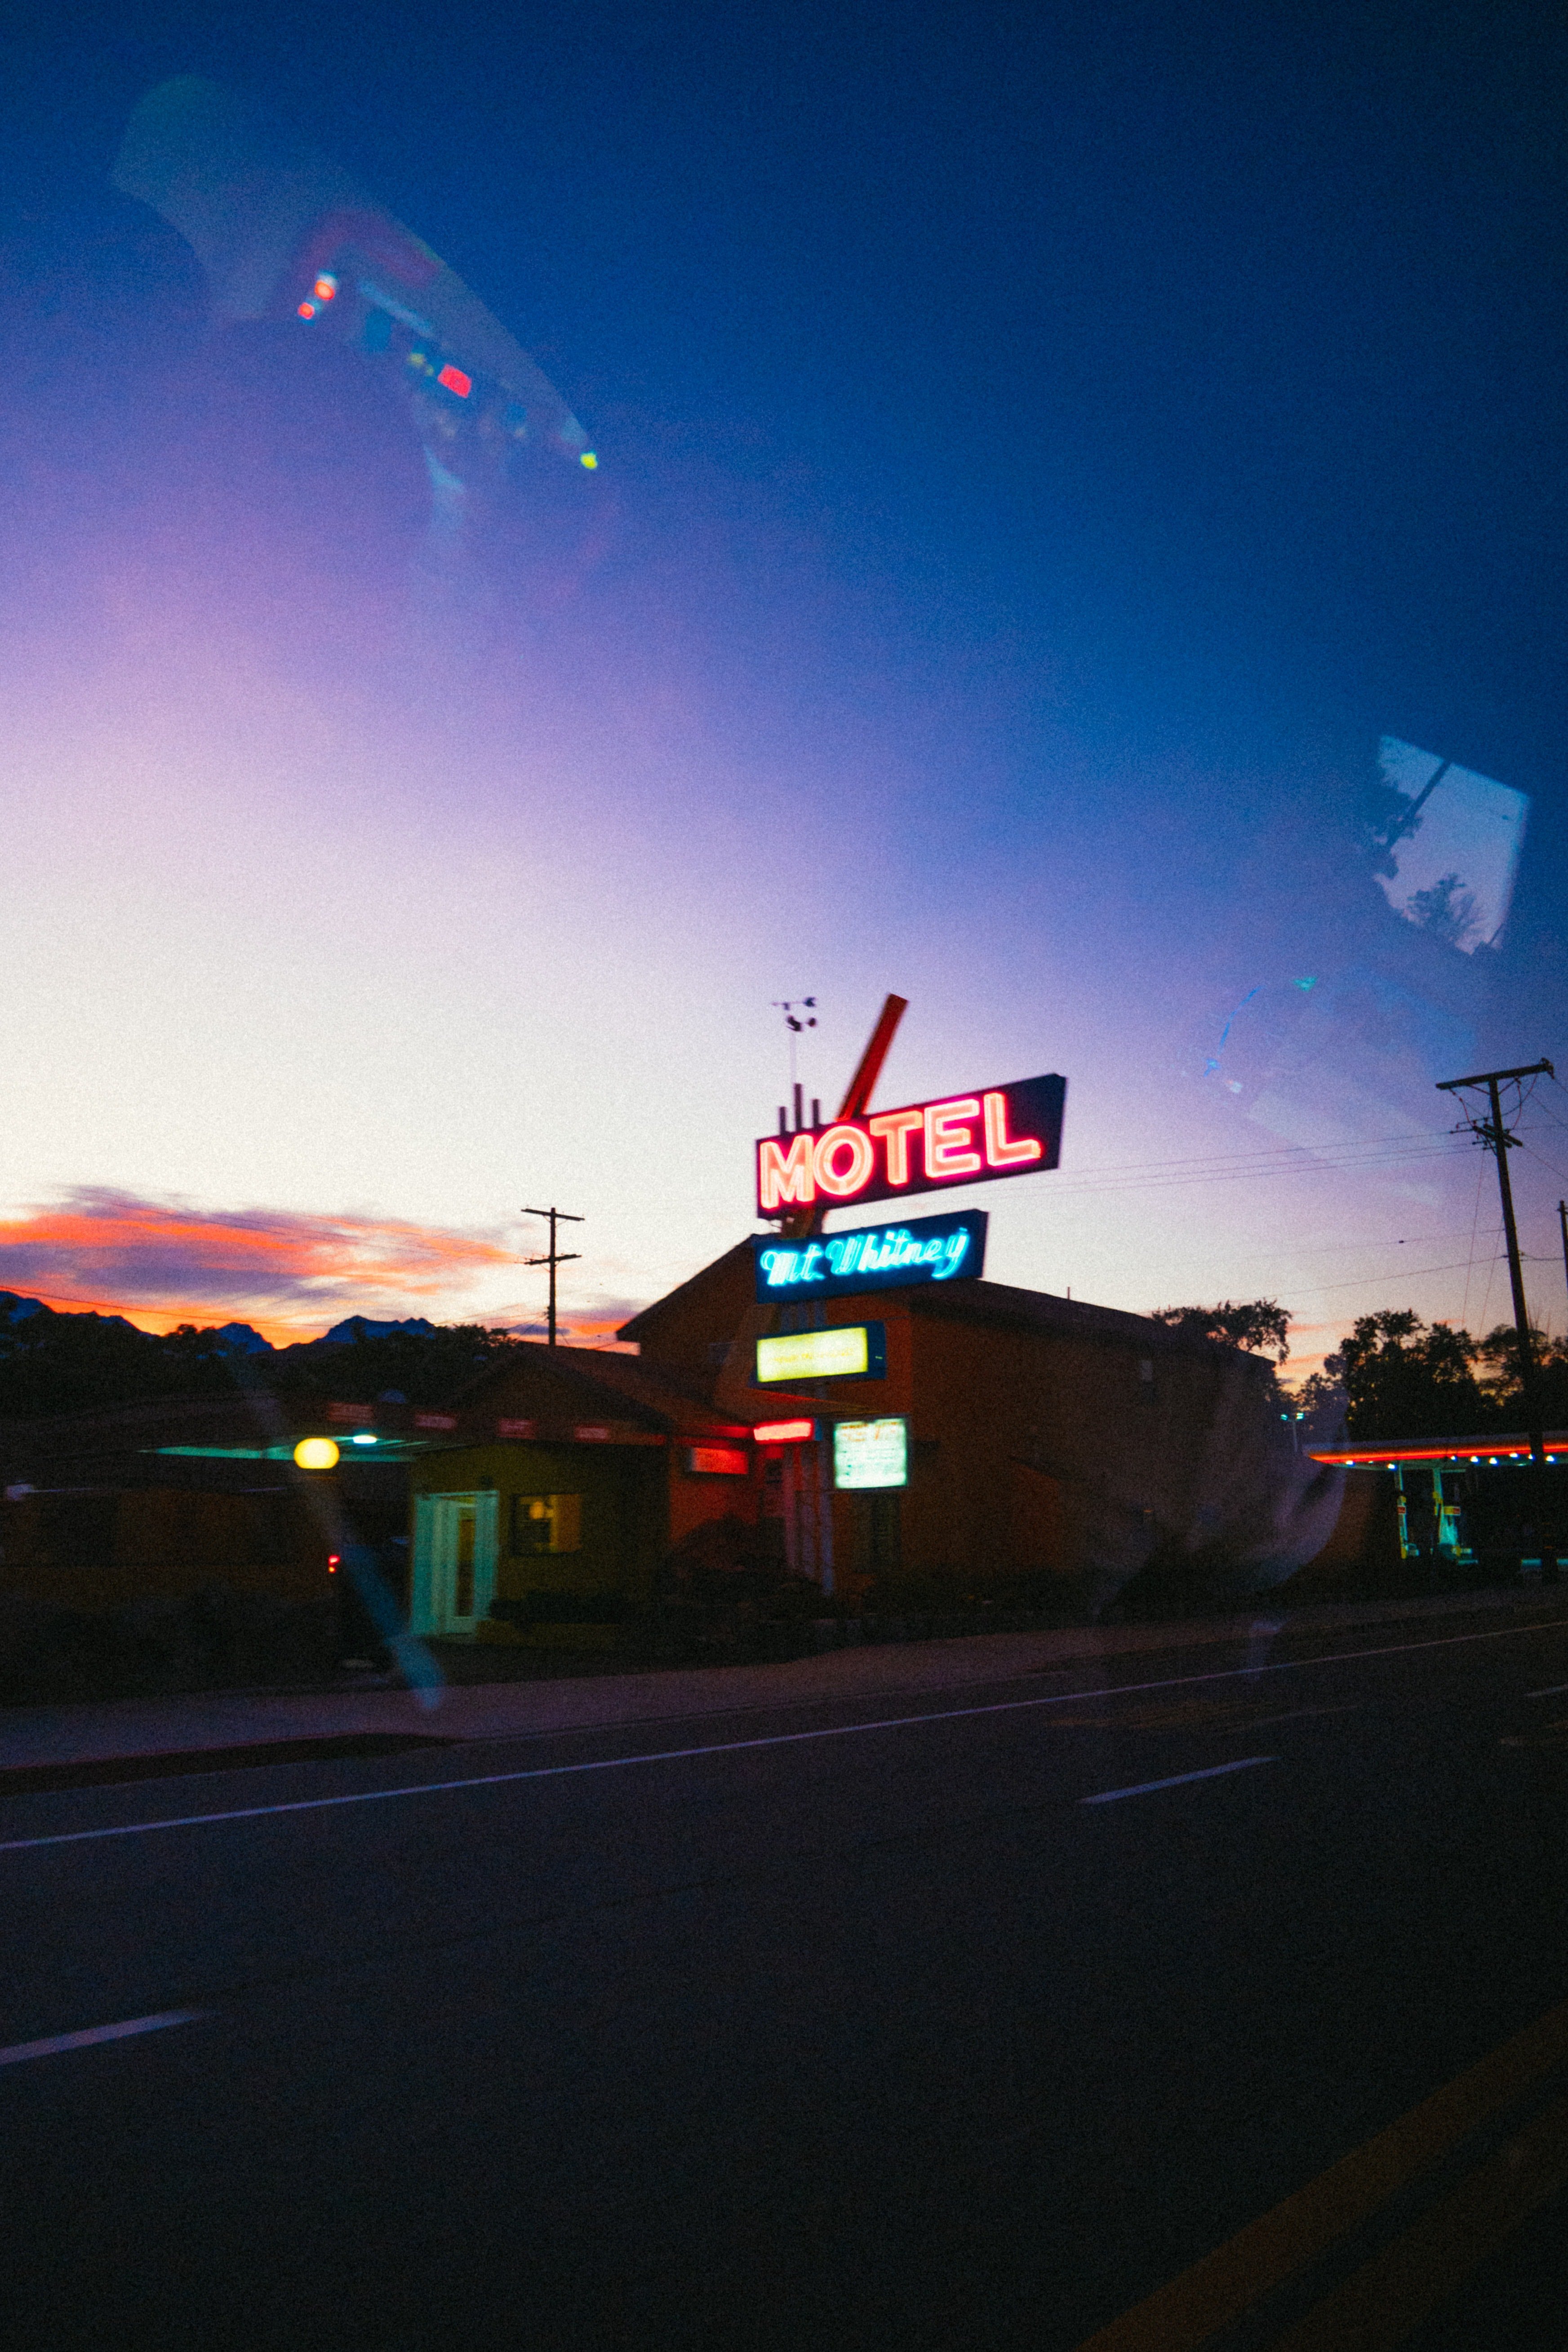 Amanda found Julian in a motel, angering her. | Source: Pexels